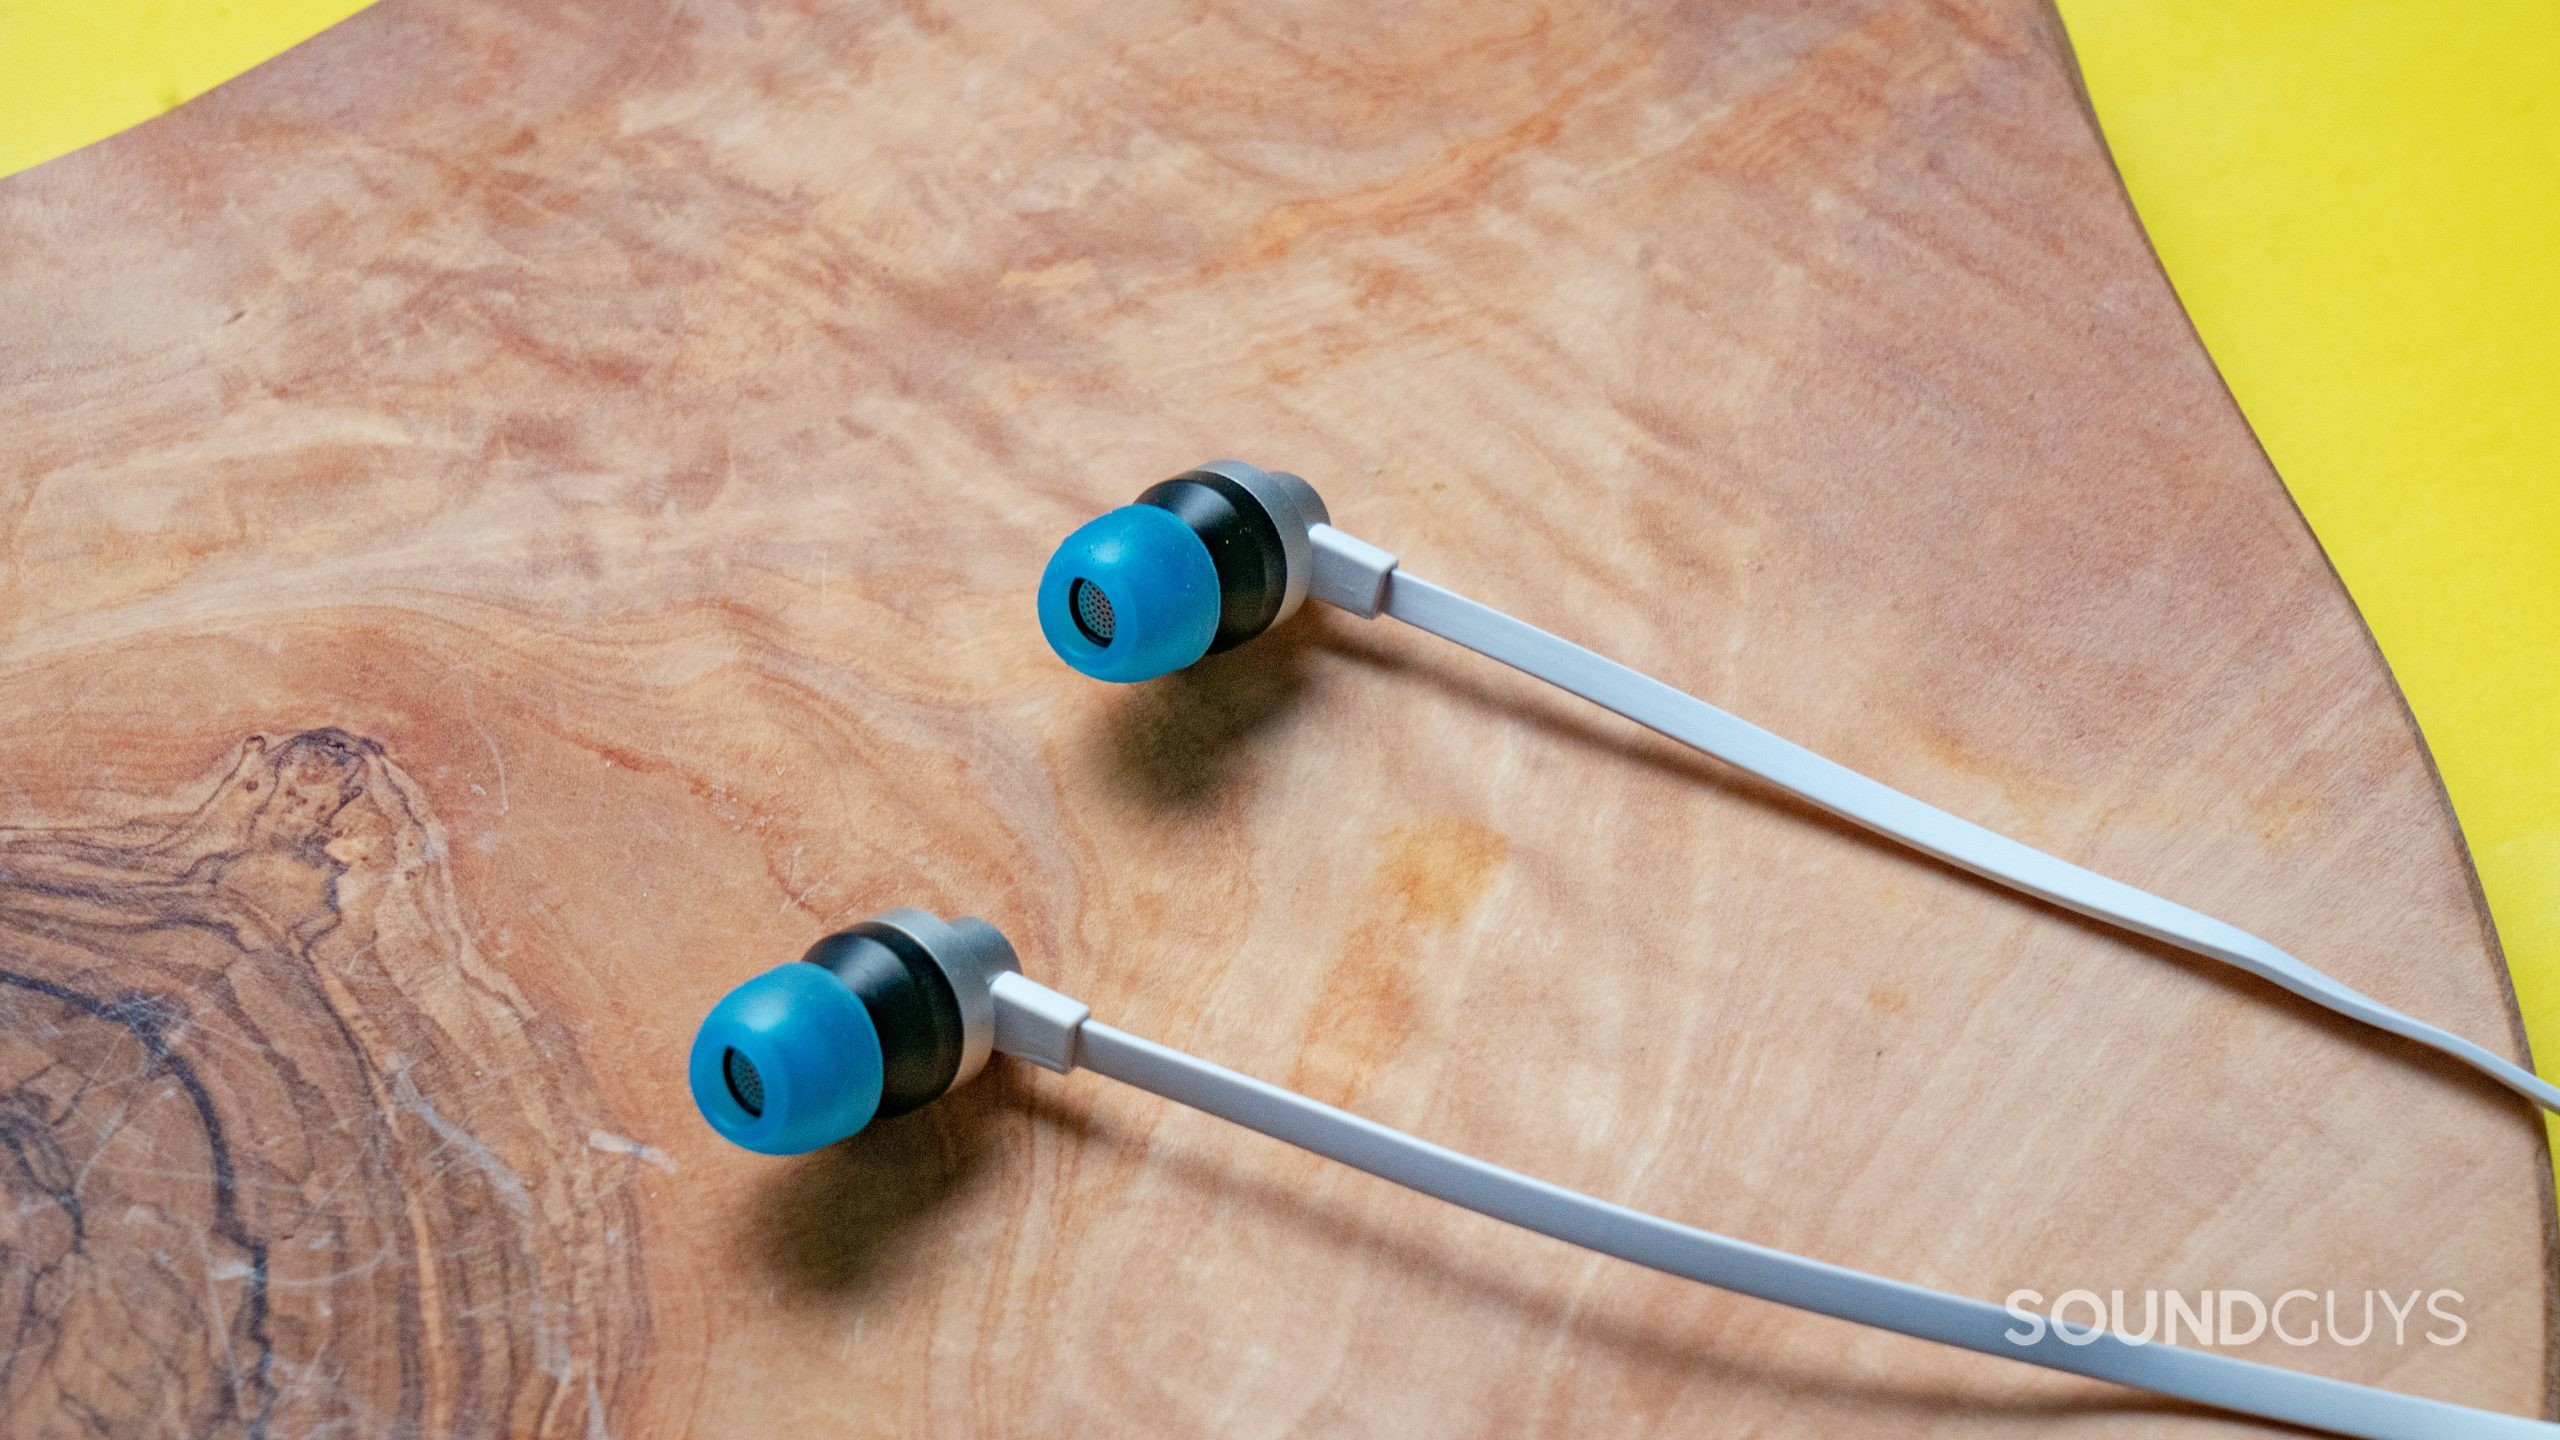 The two earbuds of the Logitech G333 sitting on a wooden table, facing neatly in the same direction.